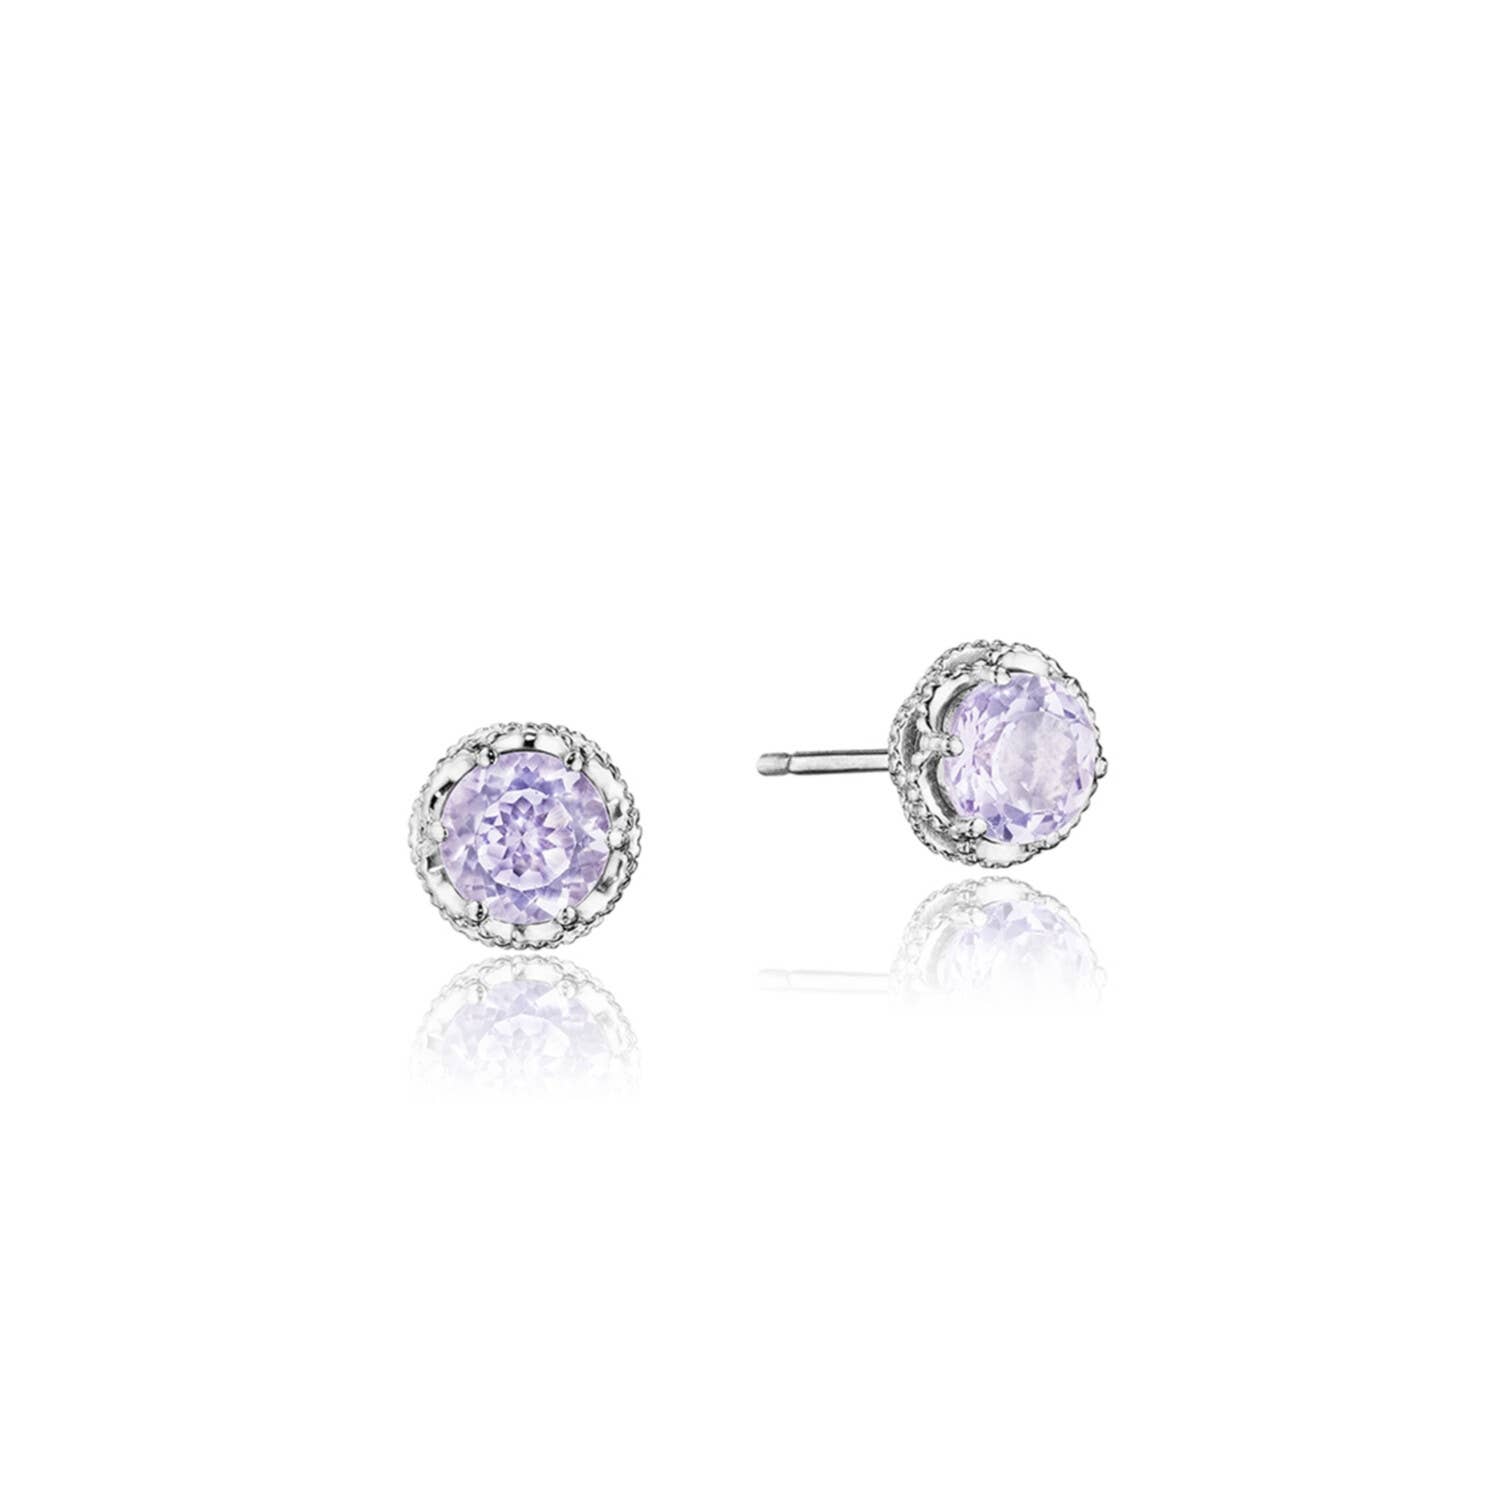 Petite Crescent Crown Studs featuring Rose Amethyst